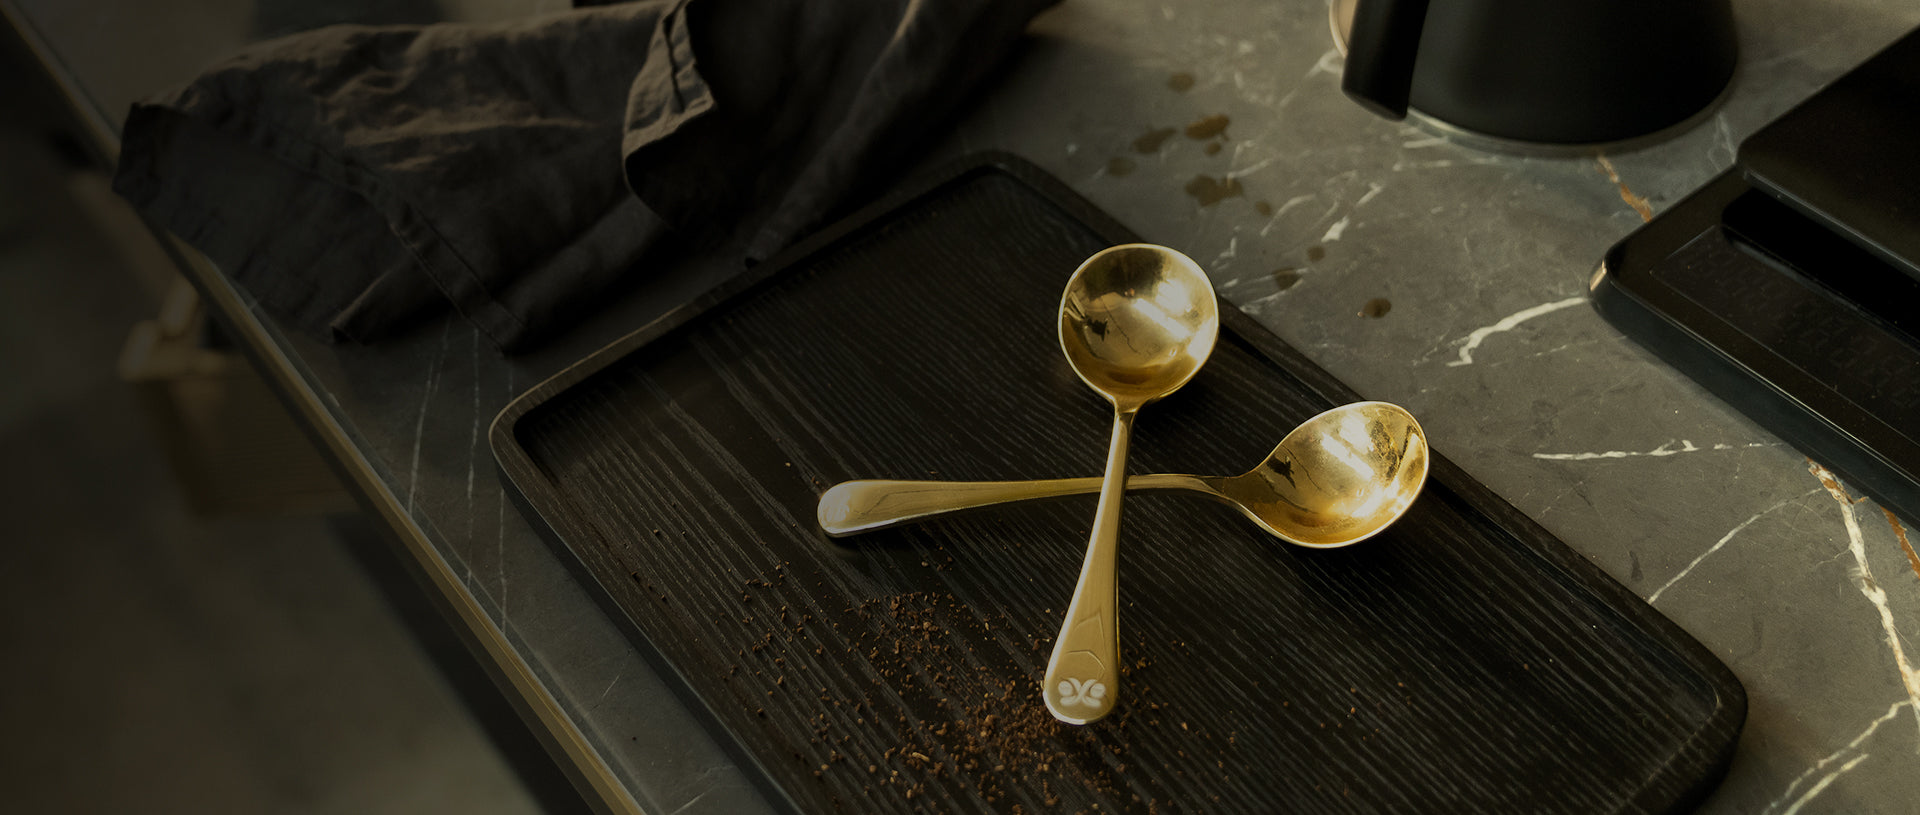 Spoons resting on cafe counter